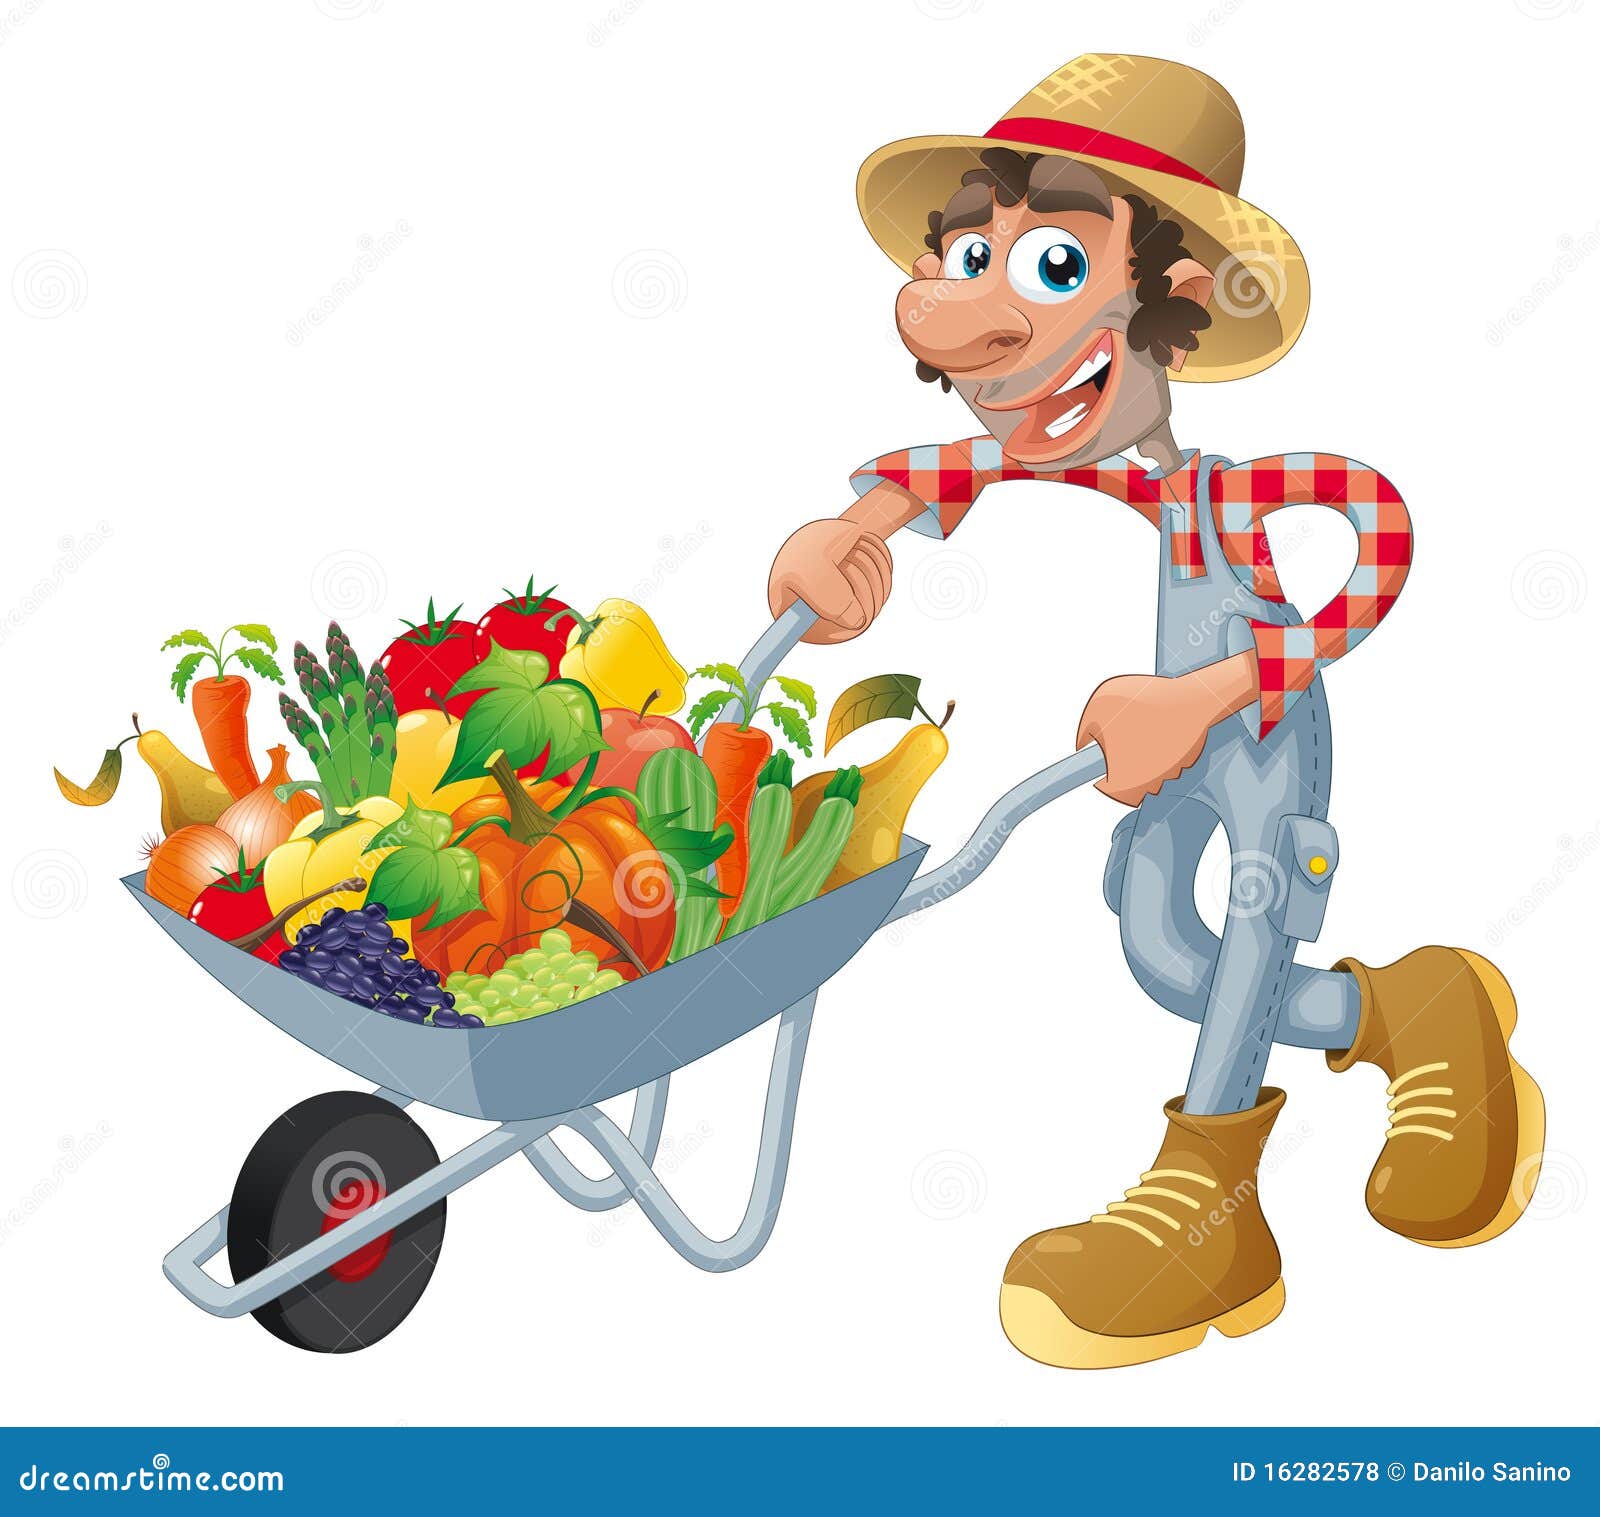 peasant with wheelbarrow, vegetables and fruits.